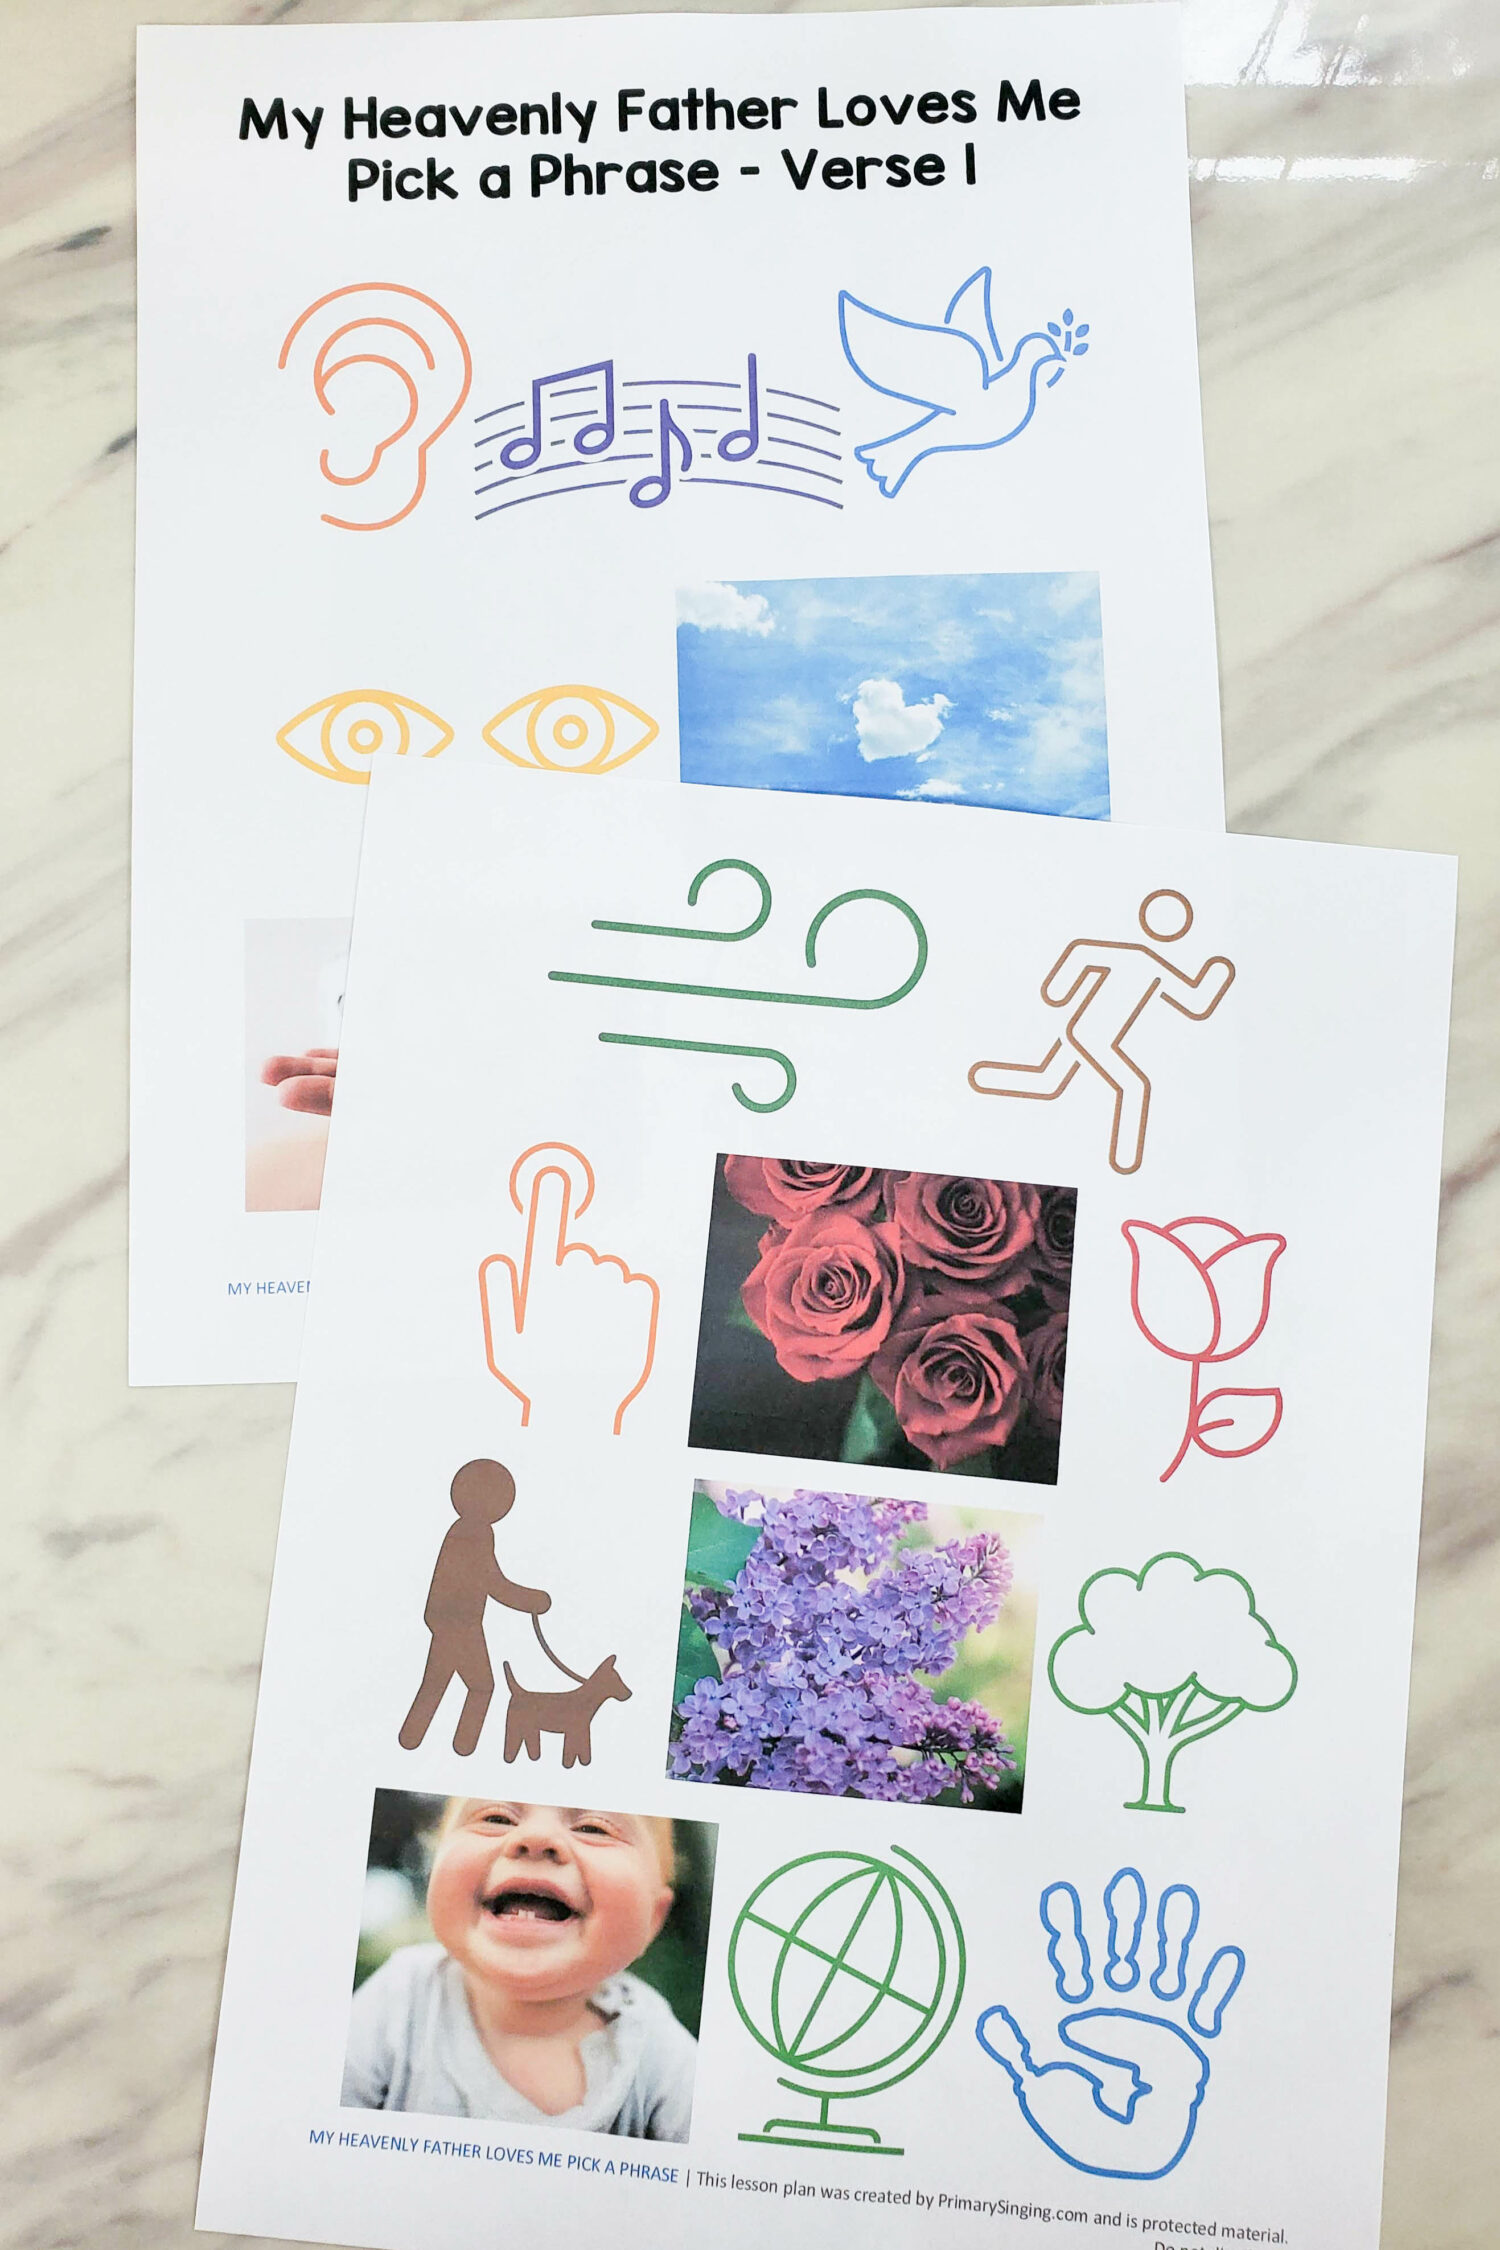 My Heavenly Father Loves Me - Primary Singing Time Game - Pick a Picture Phrase. Use these keyword pictures that represent a line of the song to help teach the lyrics. With printable song helps for LDS Primary music leaders.